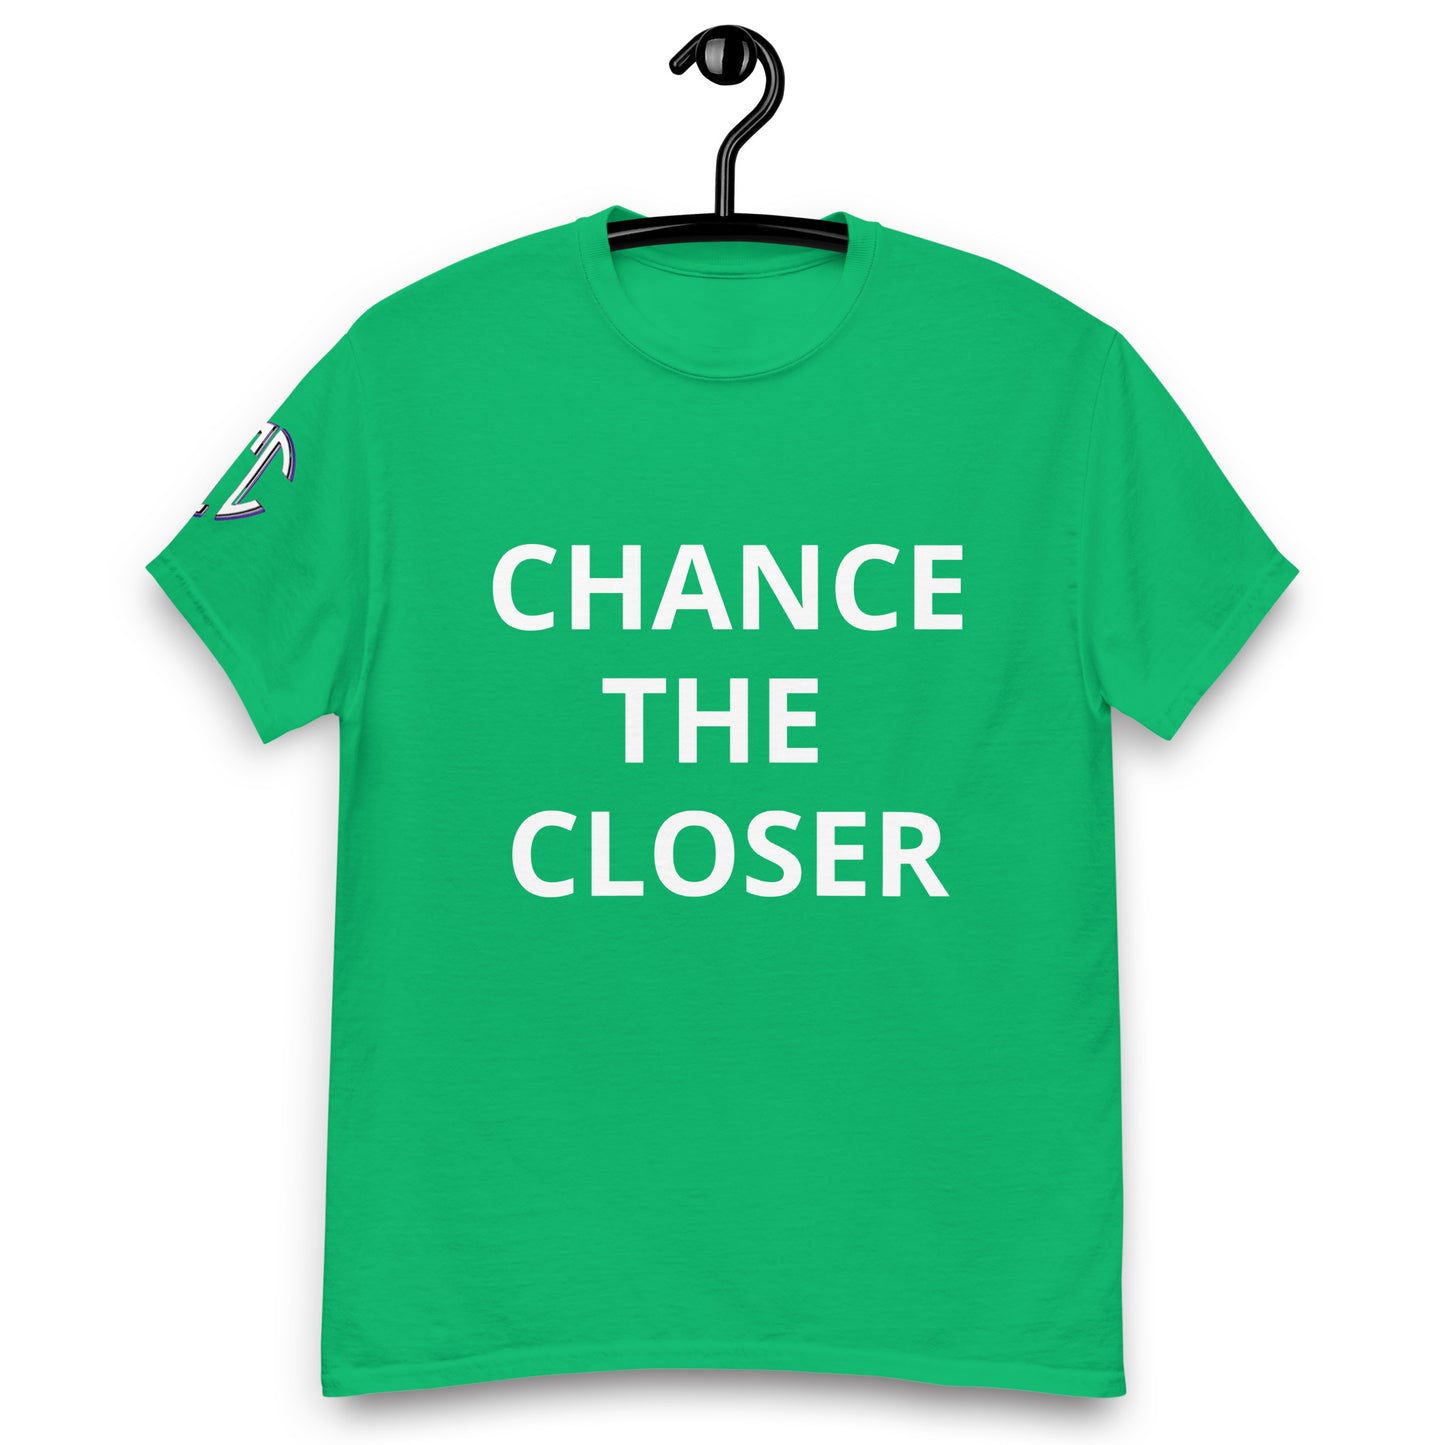 Chance the Closer classic tee